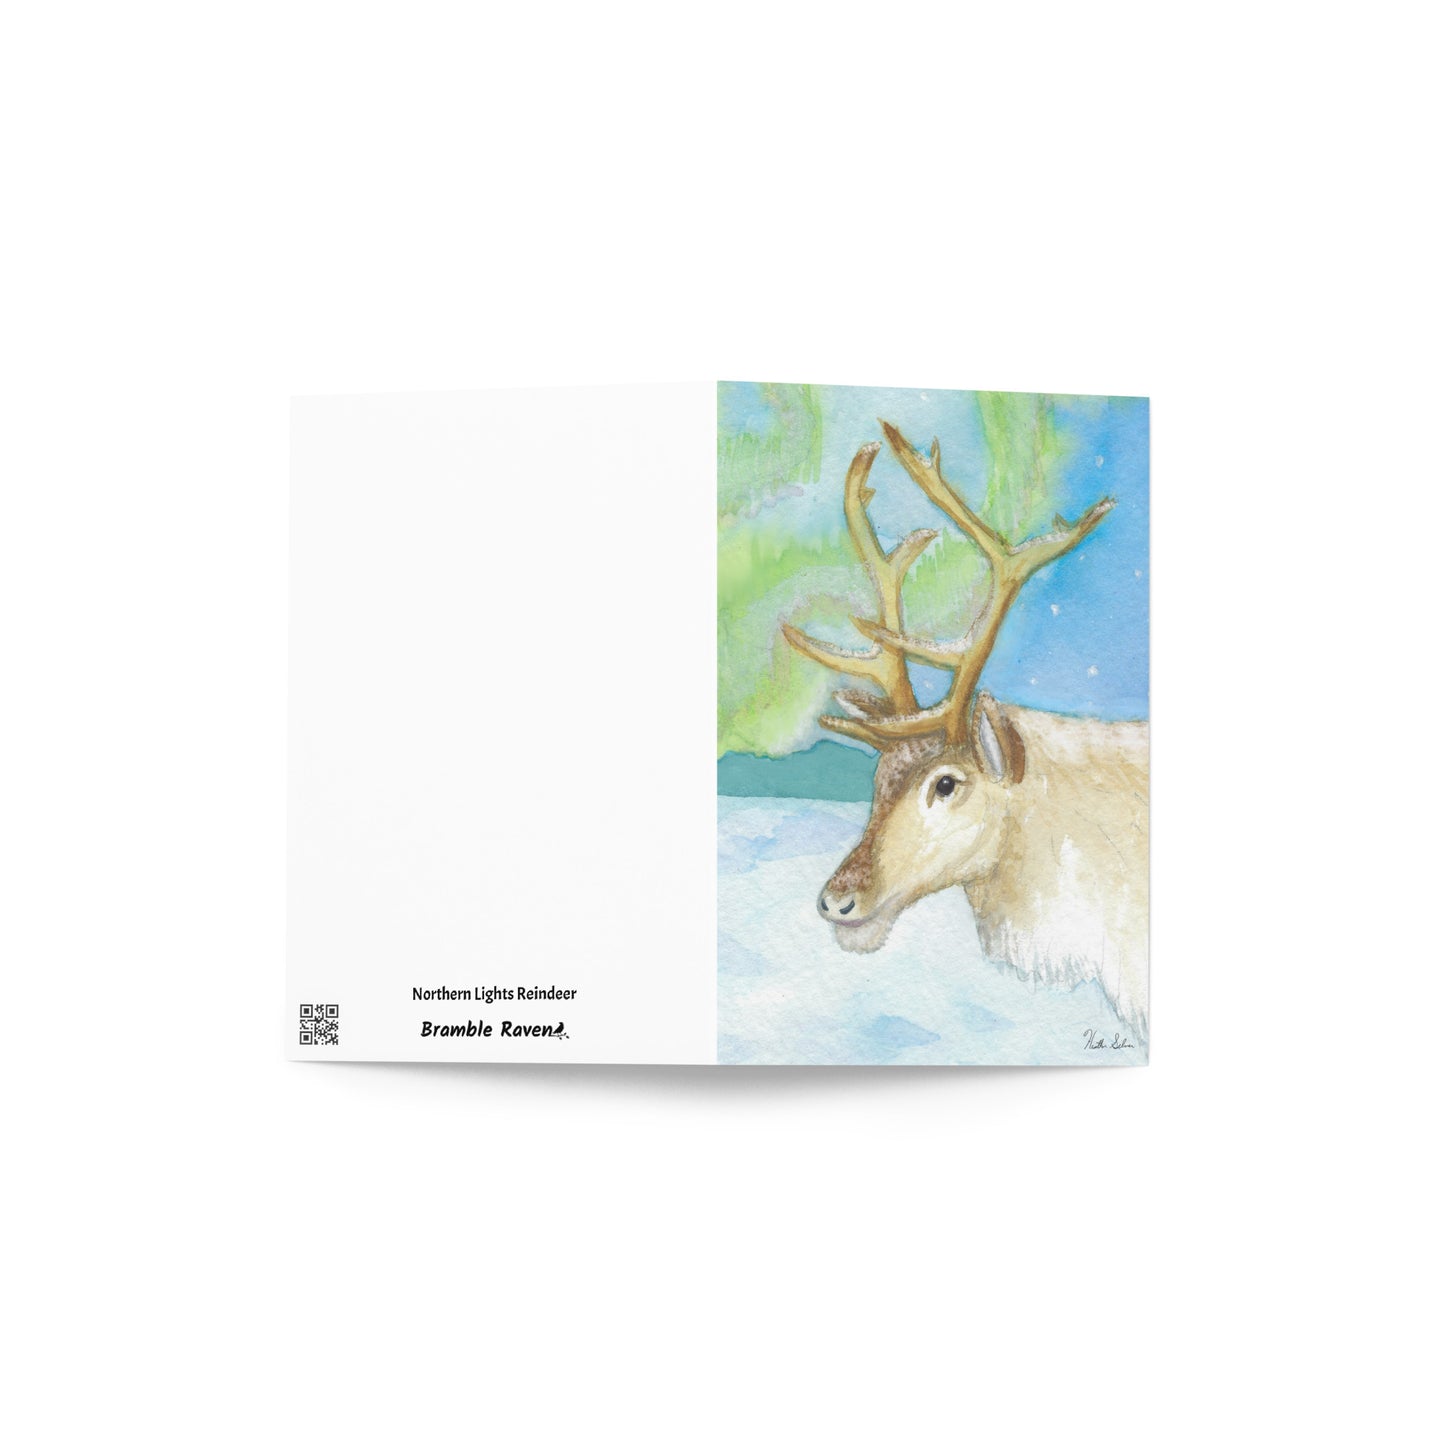 4 x 6 inch greeting card. Features watercolor print of a reindeer in the snow with northern lights in the sky. Blank inside. Comes with a white envelope. Shows front and back cover.